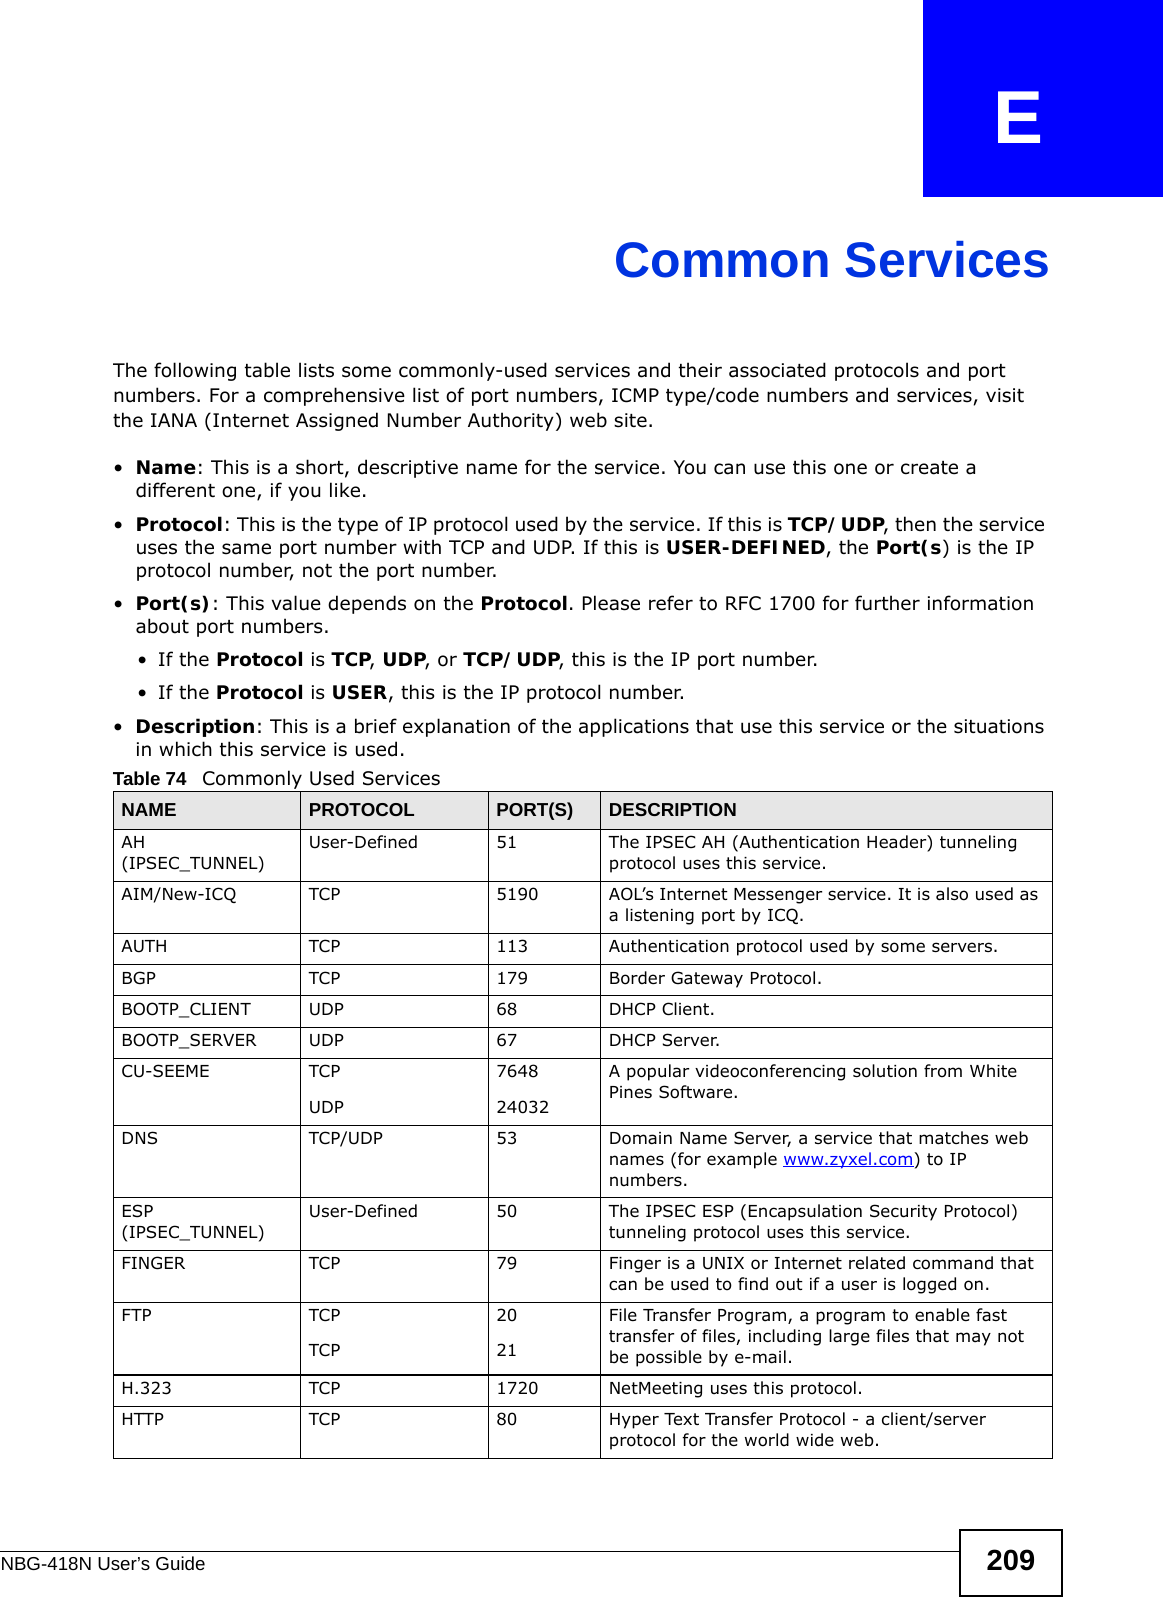 NBG-418N User’s Guide 209APPENDIX   ECommon ServicesThe following table lists some commonly-used services and their associated protocols and port numbers. For a comprehensive list of port numbers, ICMP type/code numbers and services, visit the IANA (Internet Assigned Number Authority) web site. •Name: This is a short, descriptive name for the service. You can use this one or create a different one, if you like.•Protocol: This is the type of IP protocol used by the service. If this is TCP/UDP, then the service uses the same port number with TCP and UDP. If this is USER-DEFINED, the Port(s) is the IP protocol number, not the port number.•Port(s): This value depends on the Protocol. Please refer to RFC 1700 for further information about port numbers.•If the Protocol is TCP, UDP, or TCP/UDP, this is the IP port number.•If the Protocol is USER, this is the IP protocol number.•Description: This is a brief explanation of the applications that use this service or the situations in which this service is used.Table 74   Commonly Used ServicesNAME PROTOCOL PORT(S) DESCRIPTIONAH (IPSEC_TUNNEL)User-Defined 51 The IPSEC AH (Authentication Header) tunneling protocol uses this service.AIM/New-ICQ TCP 5190 AOL’s Internet Messenger service. It is also used as a listening port by ICQ.AUTH TCP 113 Authentication protocol used by some servers.BGP TCP 179 Border Gateway Protocol.BOOTP_CLIENT UDP 68 DHCP Client.BOOTP_SERVER UDP 67 DHCP Server.CU-SEEME TCPUDP764824032A popular videoconferencing solution from White Pines Software.DNS TCP/UDP 53 Domain Name Server, a service that matches web names (for example www.zyxel.com) to IP numbers.ESP (IPSEC_TUNNEL)User-Defined 50 The IPSEC ESP (Encapsulation Security Protocol) tunneling protocol uses this service.FINGER TCP 79 Finger is a UNIX or Internet related command that can be used to find out if a user is logged on.FTP TCPTCP2021File Transfer Program, a program to enable fast transfer of files, including large files that may not be possible by e-mail.H.323 TCP 1720 NetMeeting uses this protocol.HTTP TCP 80 Hyper Text Transfer Protocol - a client/server protocol for the world wide web.